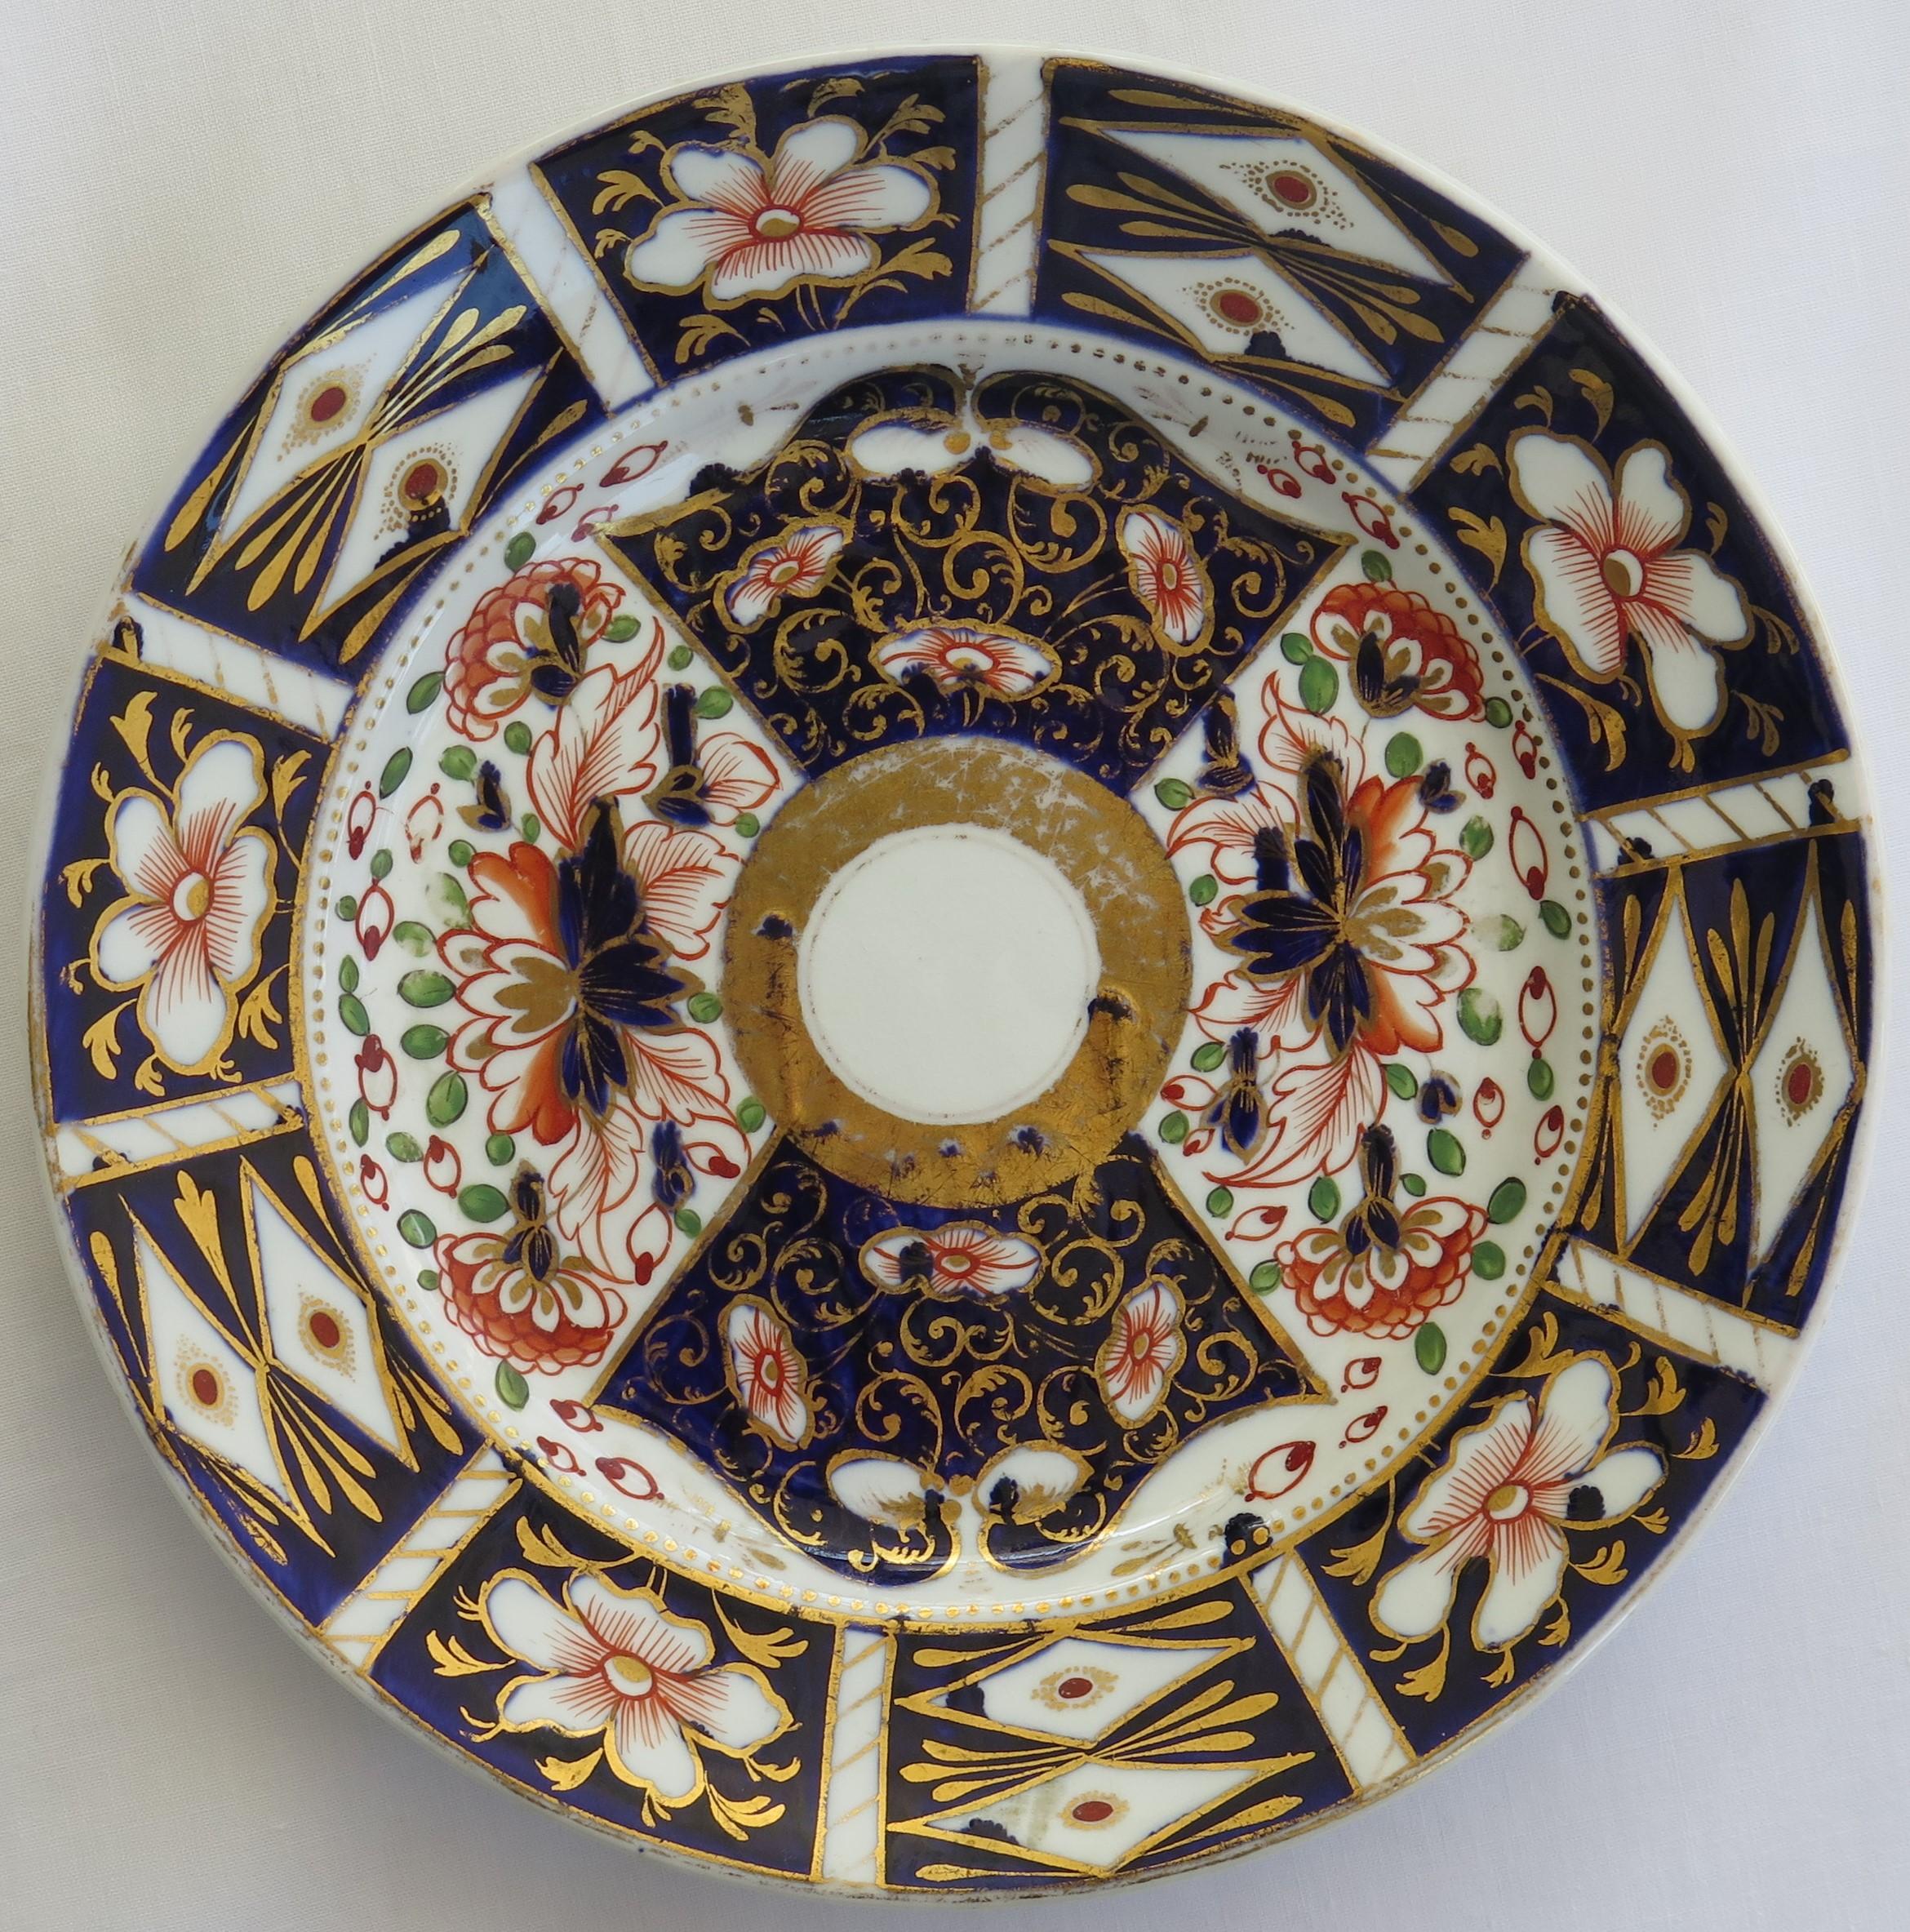 SIX Davenport Porcelain Plates Hand Painted and Gilded Pattern, Circa 1870 For Sale 6